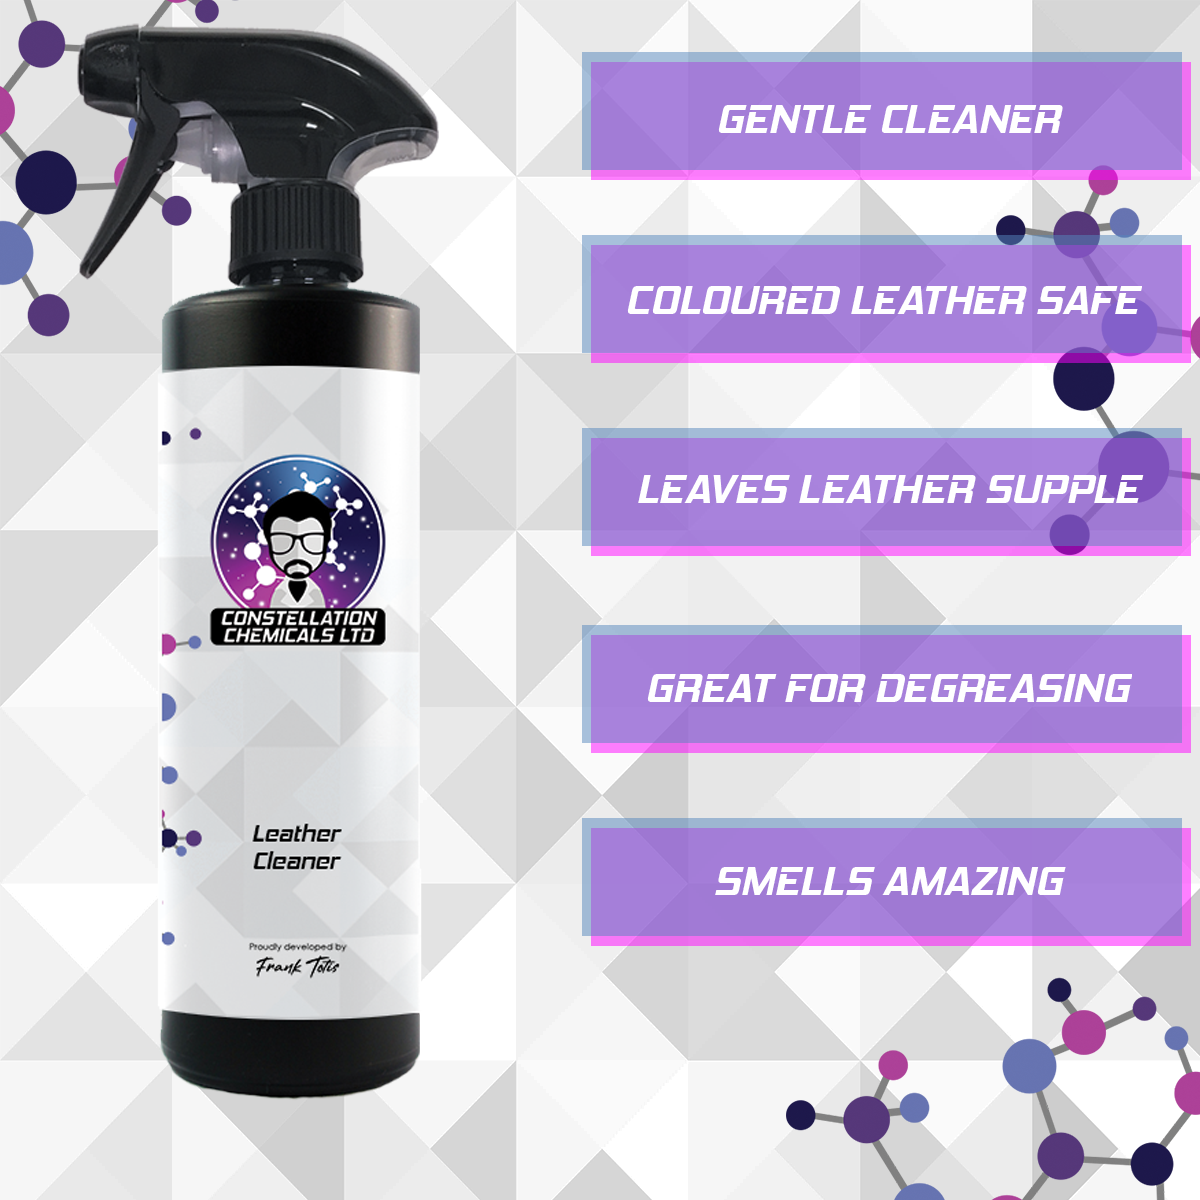 Meteor Leather Cleaner Info